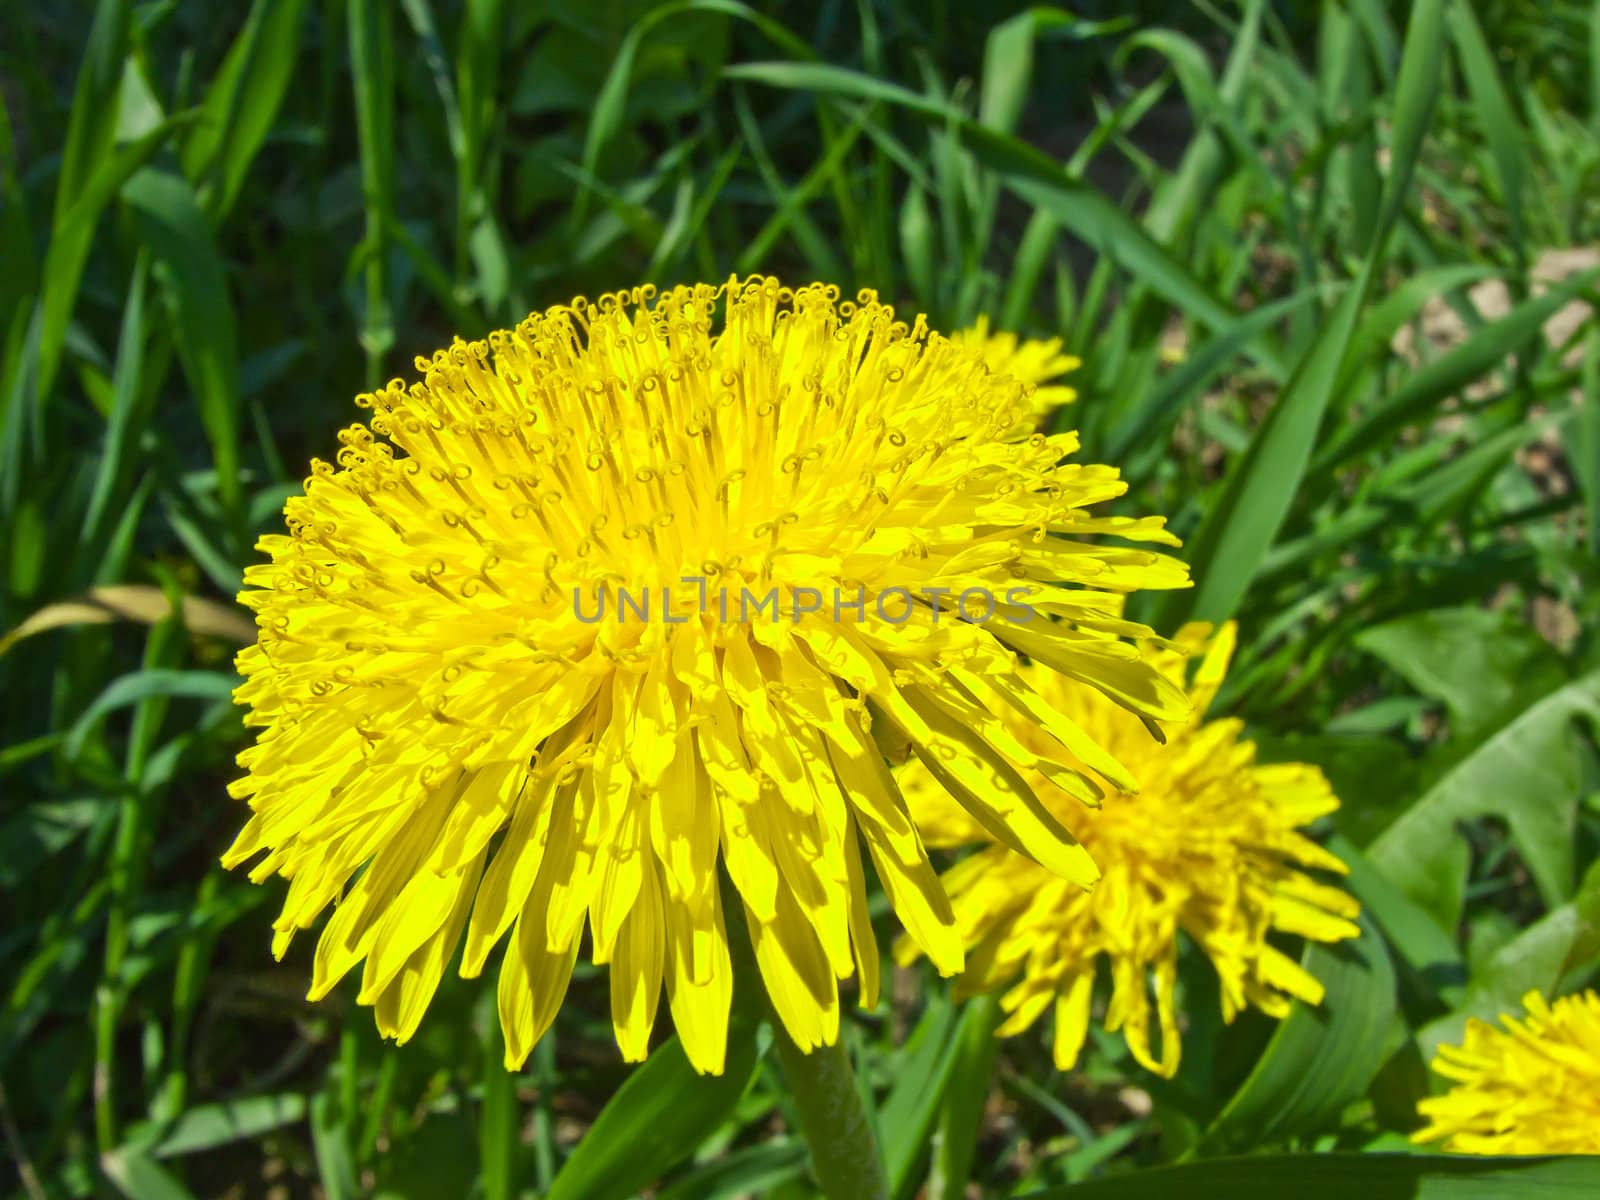 A flower of a dandelion in a field close-up